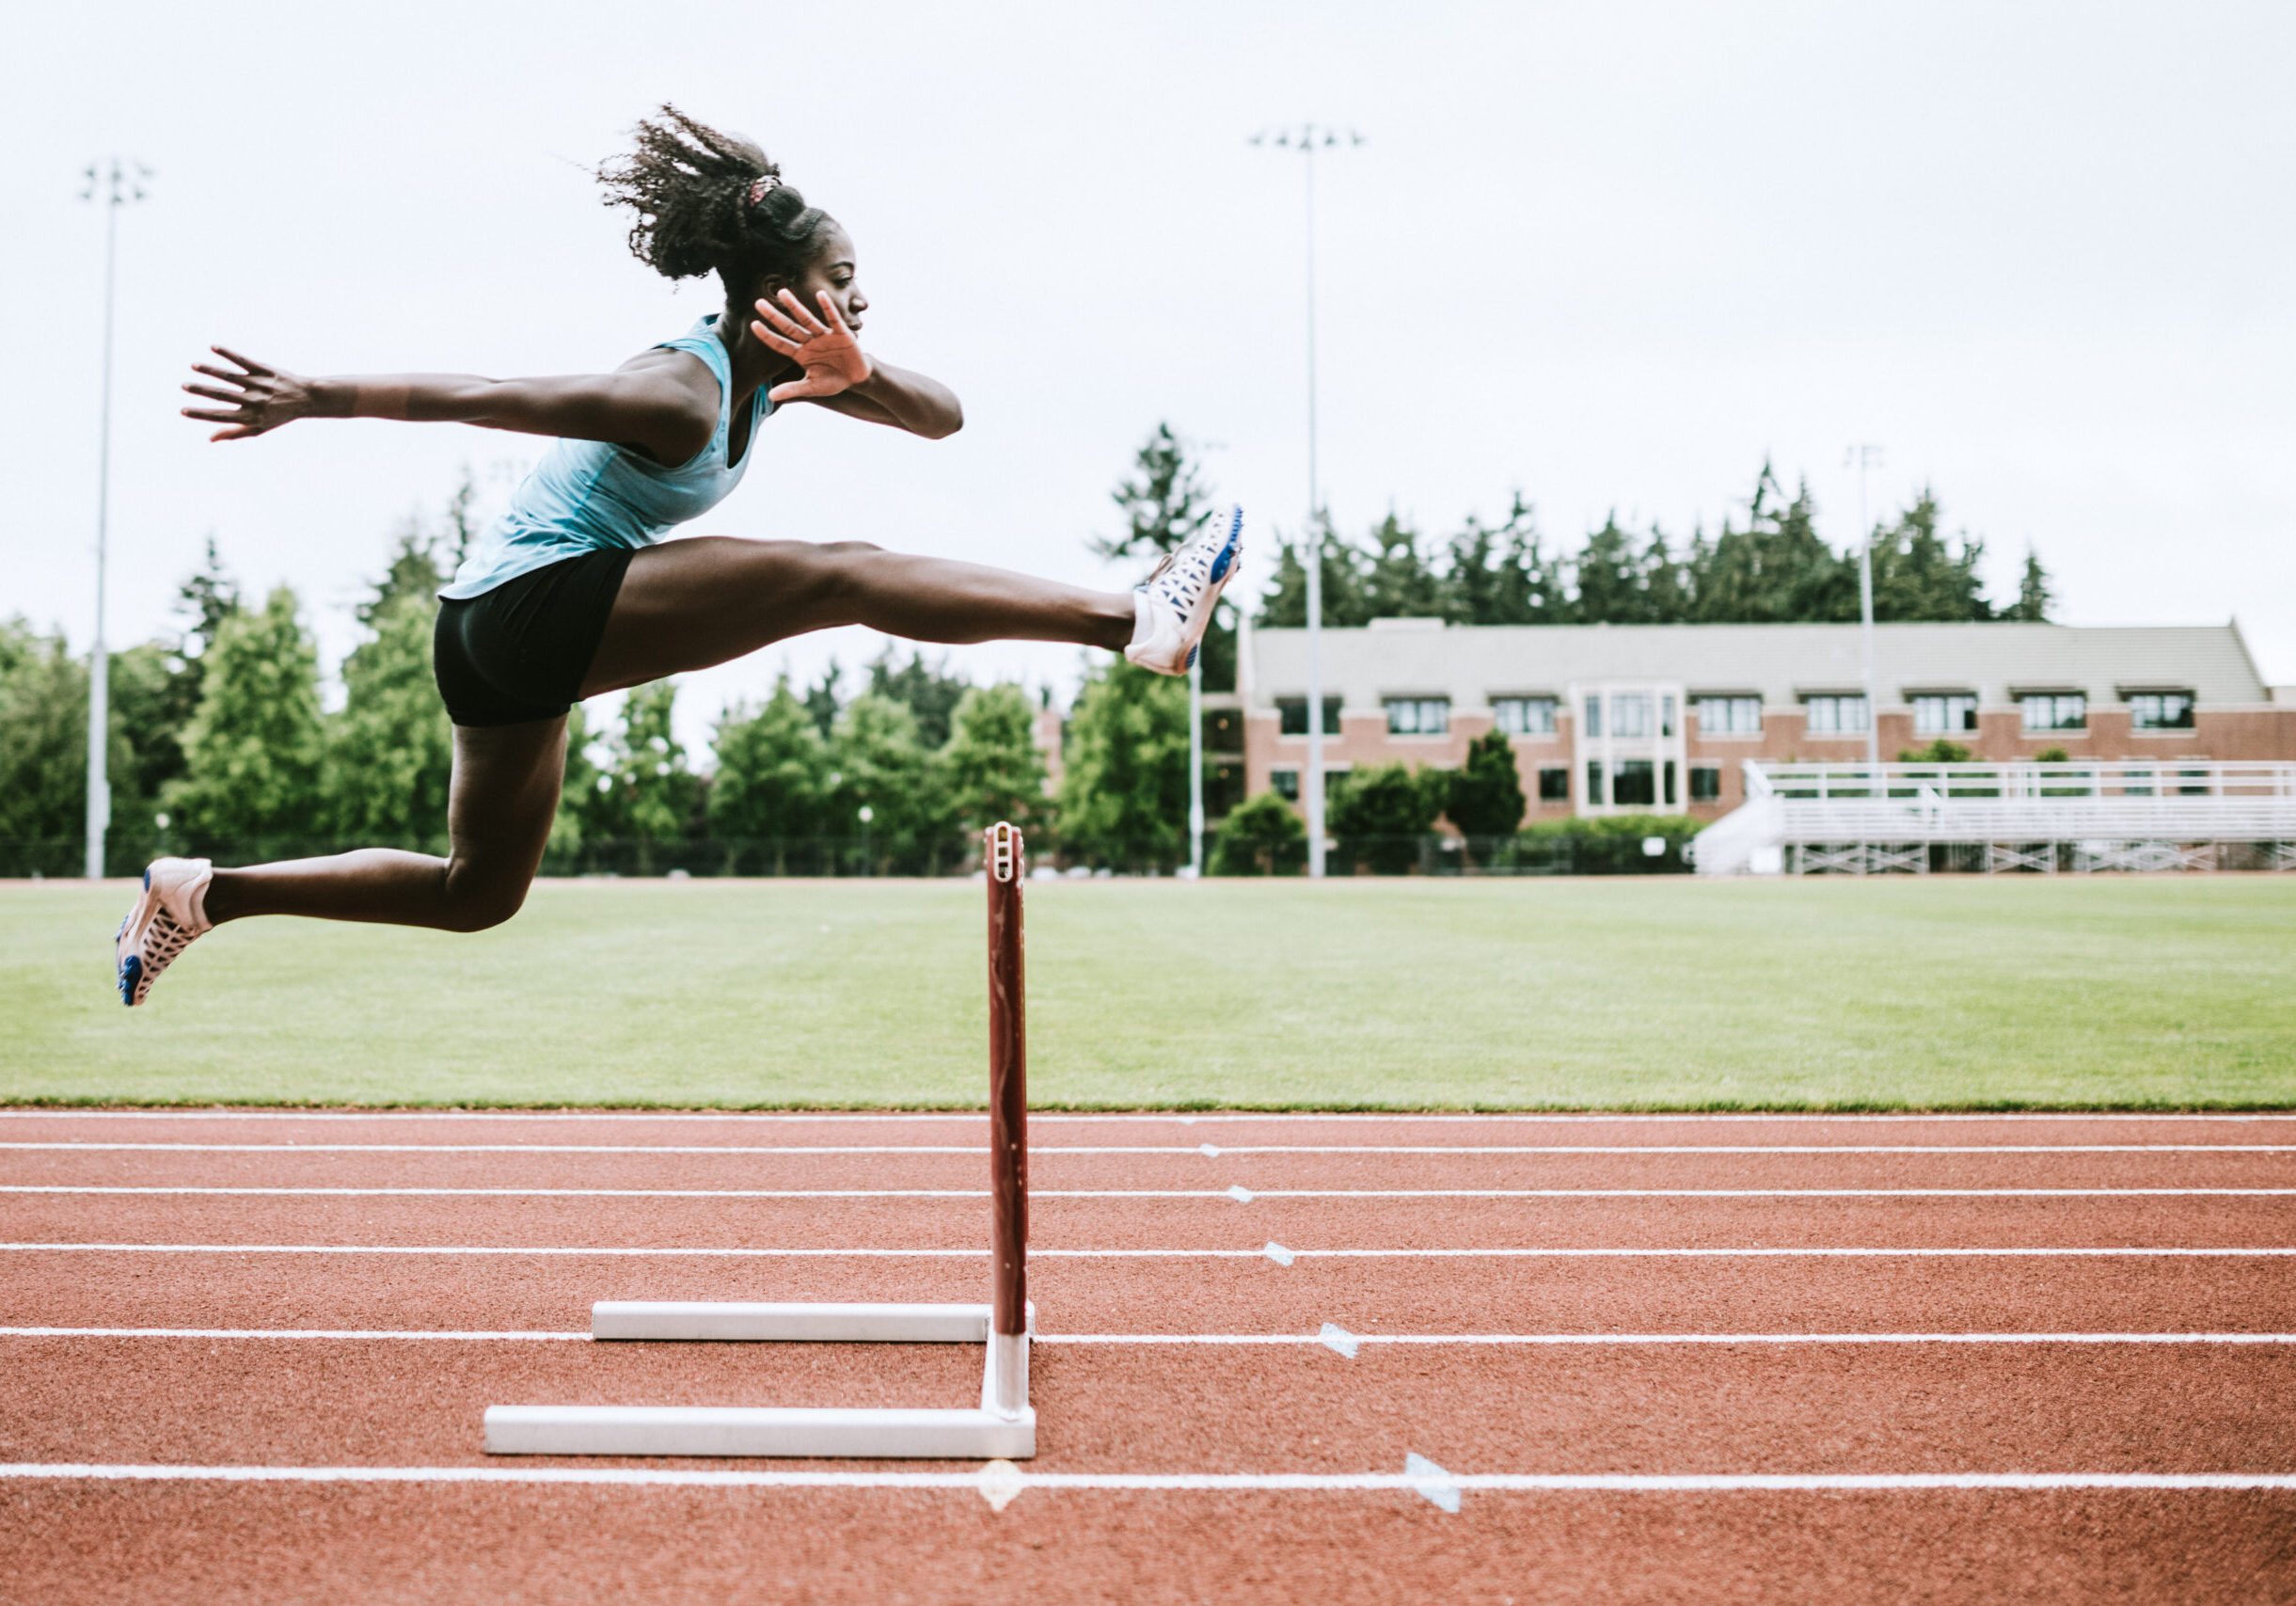 A young woman does hurdling training for her track competition training.  Captured mid- jump. Horizontal image with copy space.